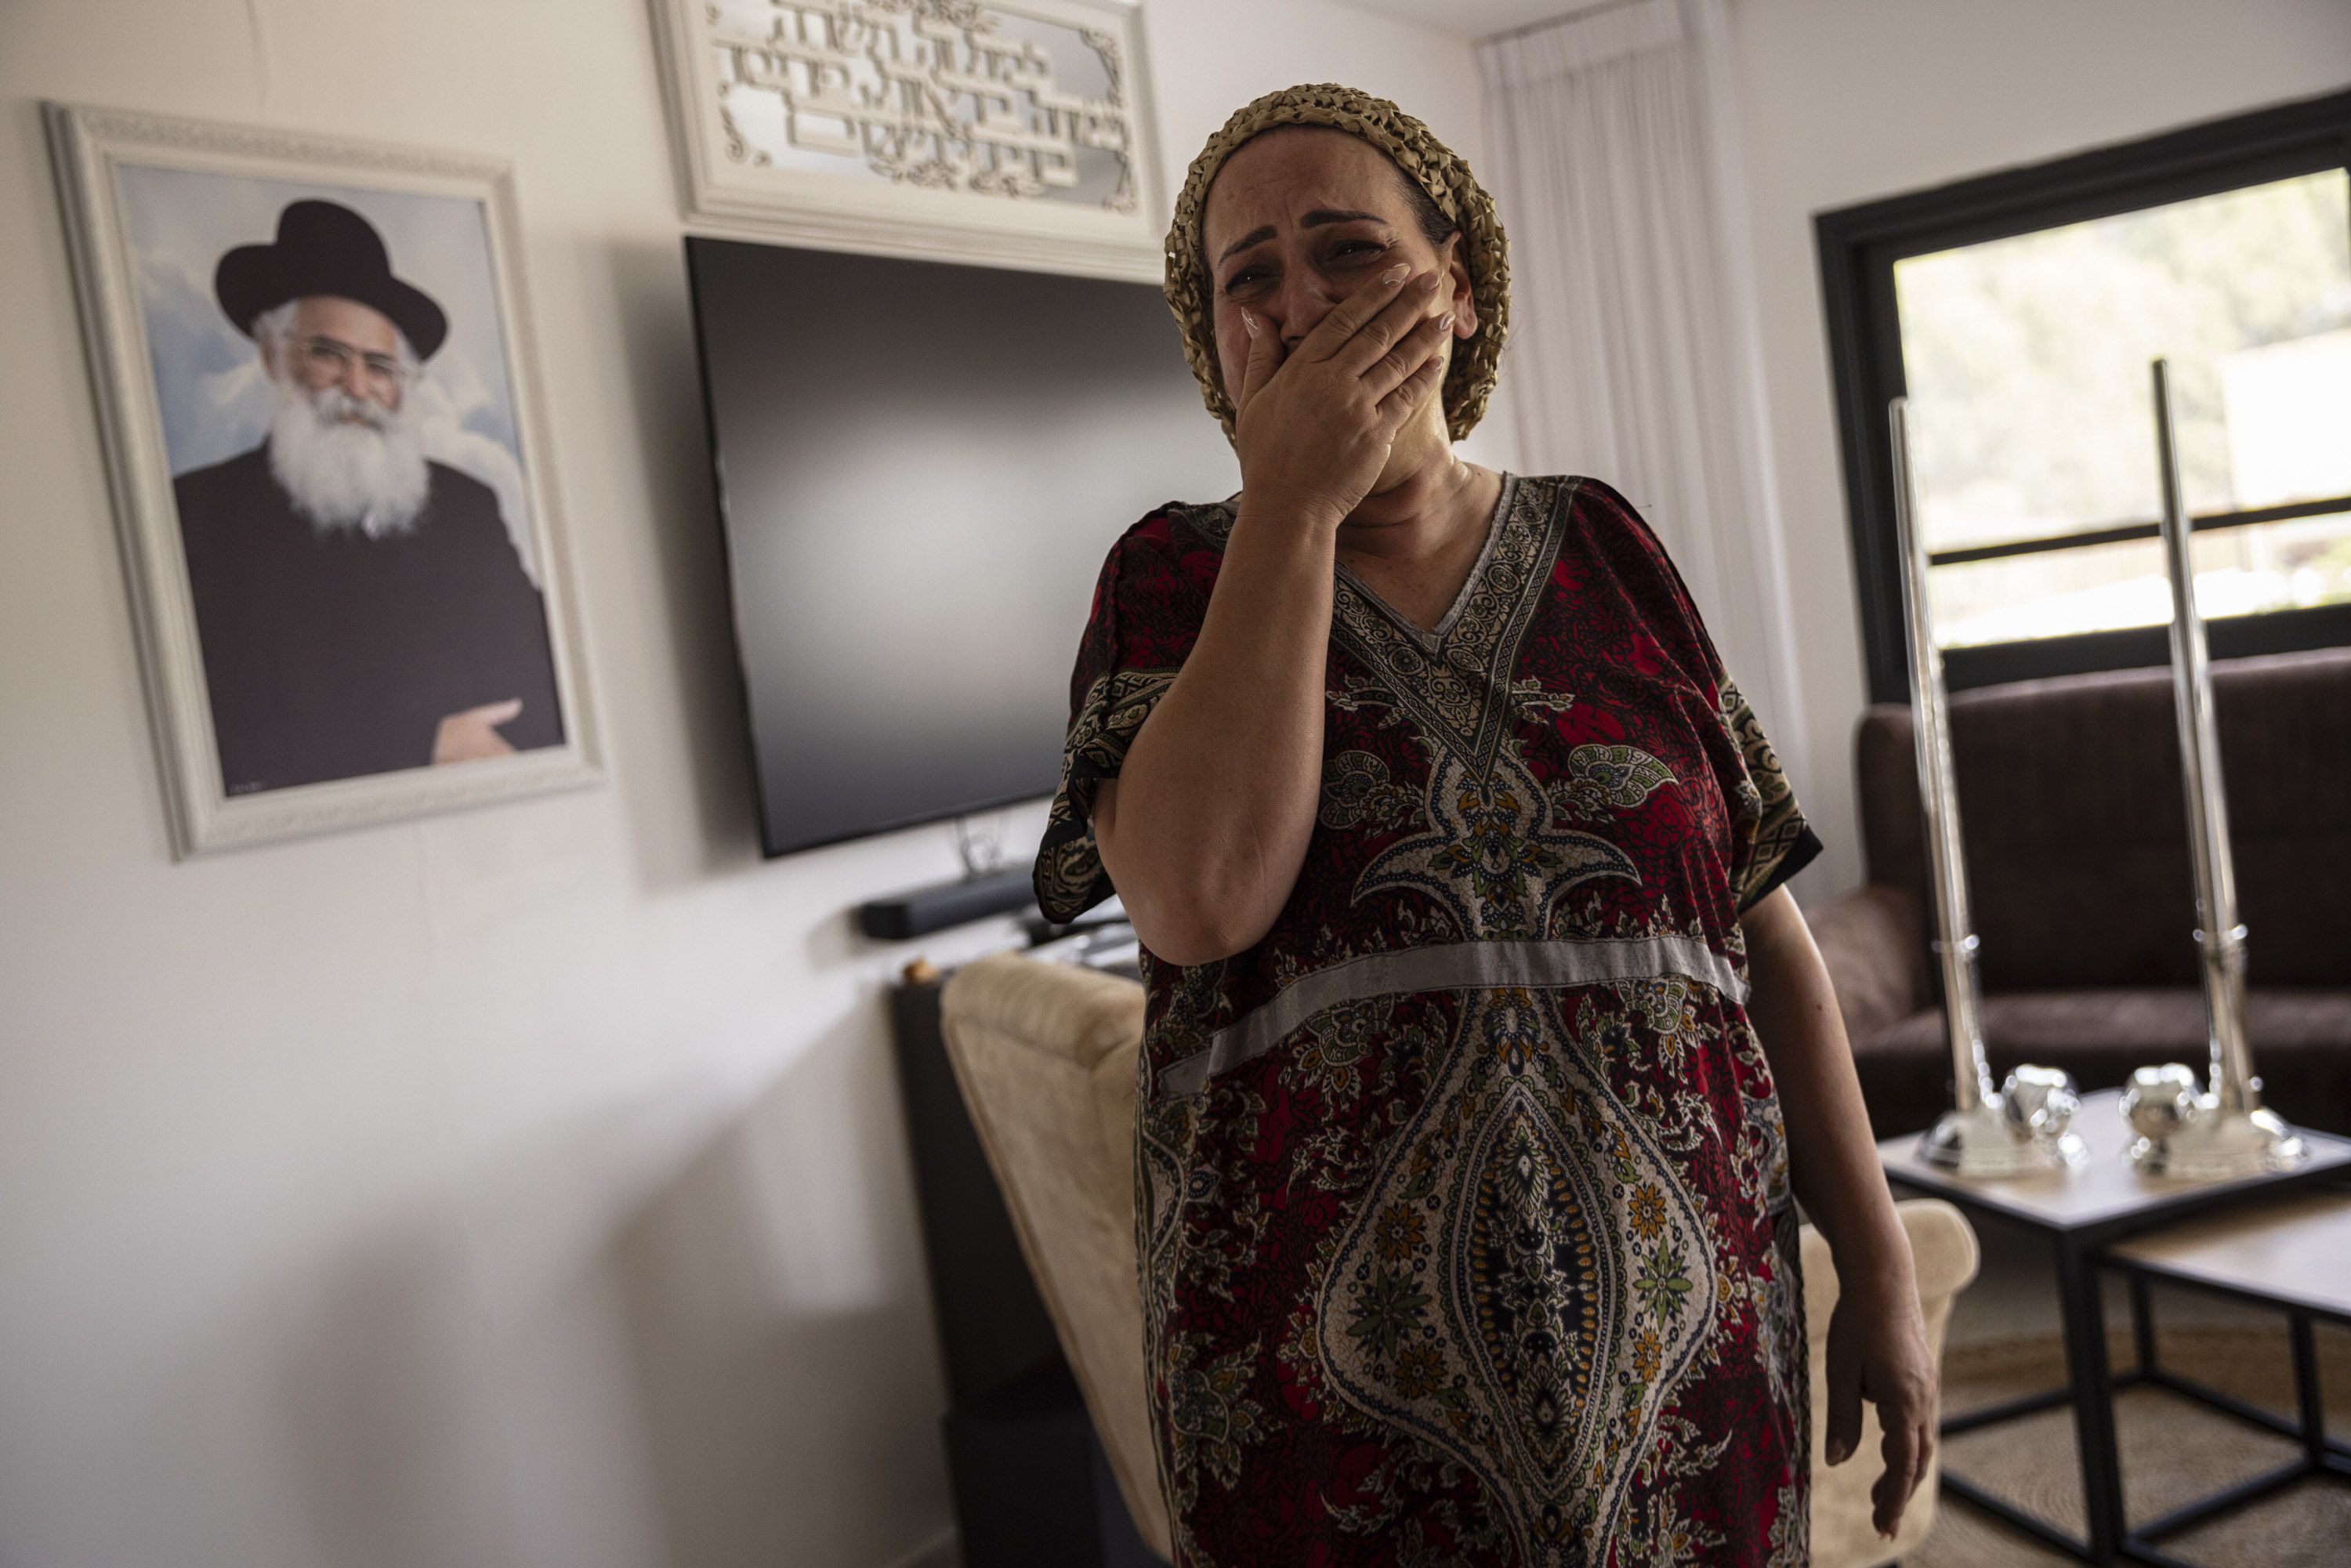 Tali Touito reacts as she describes how Hamas gunmen attacked and took over the police station on her street, in Sderot, Israel, on Sunday, October 8.